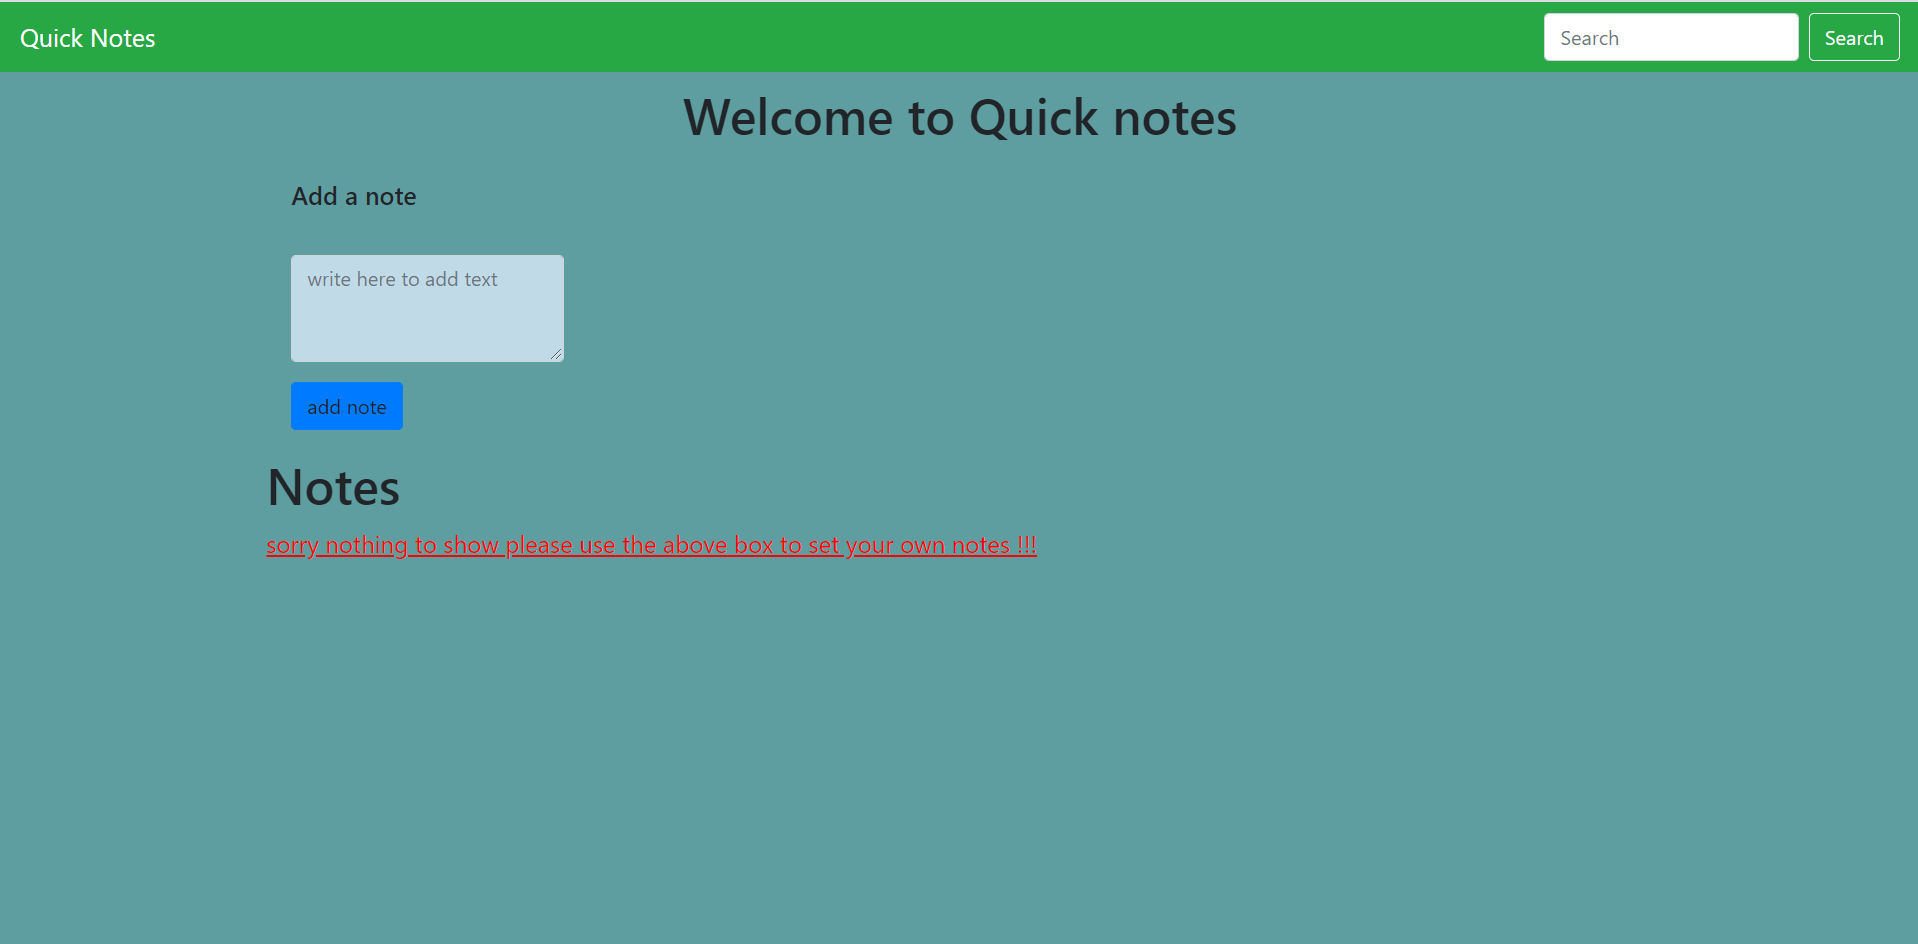 qn - QUICK NOTES IN JAVASCRIPT WITH SOURCE CODE